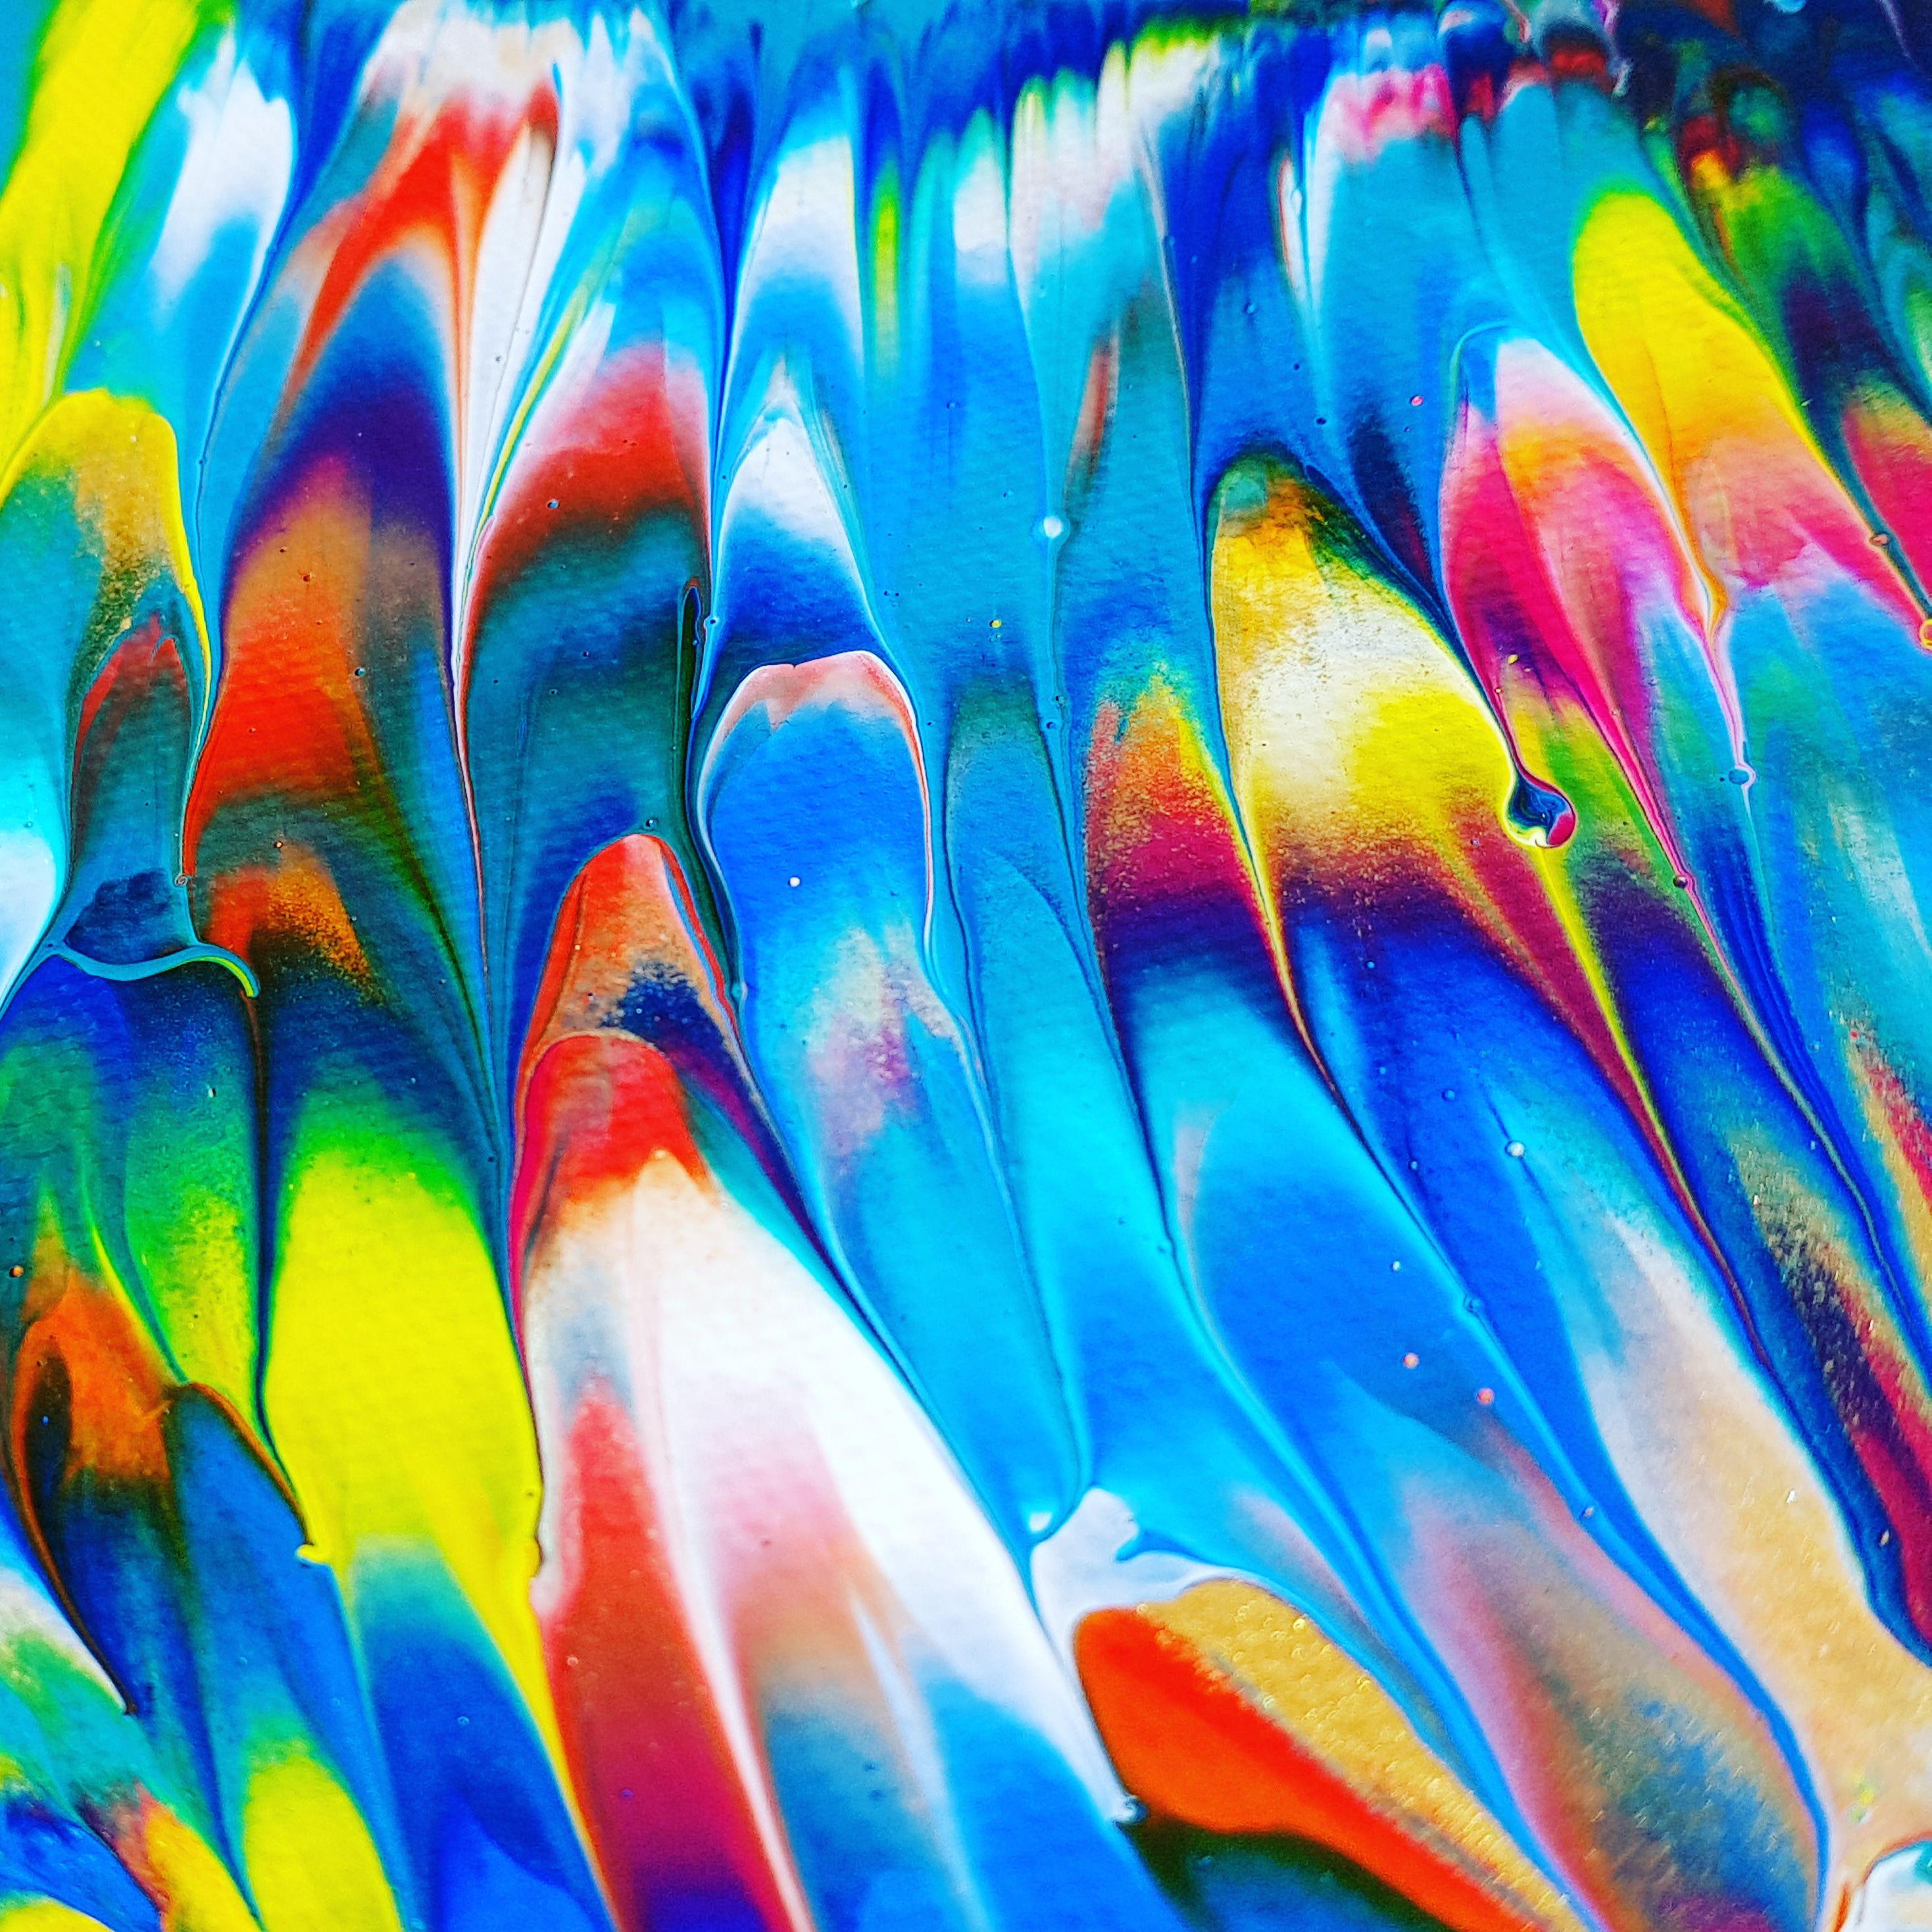 Psychedelic Waterfall No. 2, Painting, Acrylic on Canvas 2